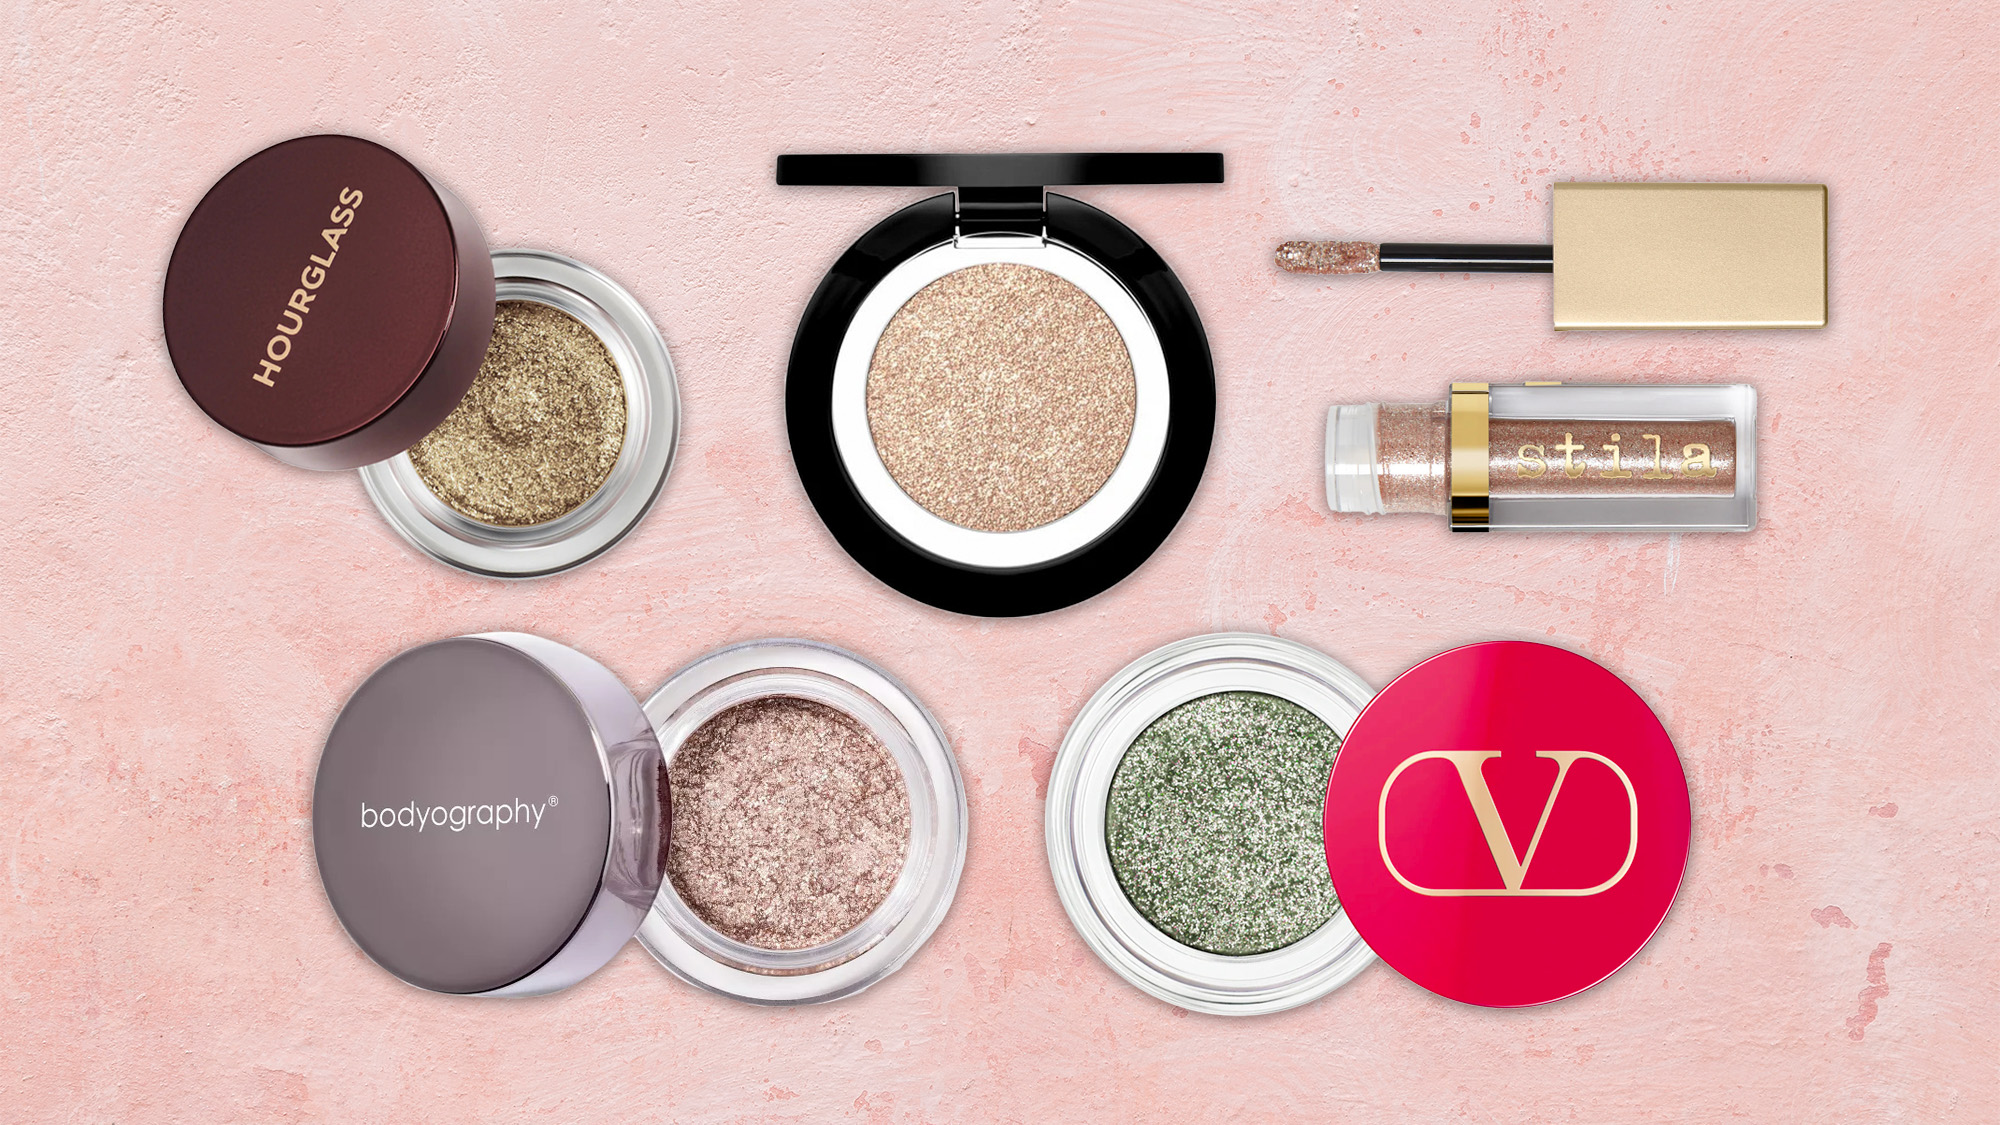 15 Best Glitter Eyeshadows to Add a Touch of Sparkle And Shine